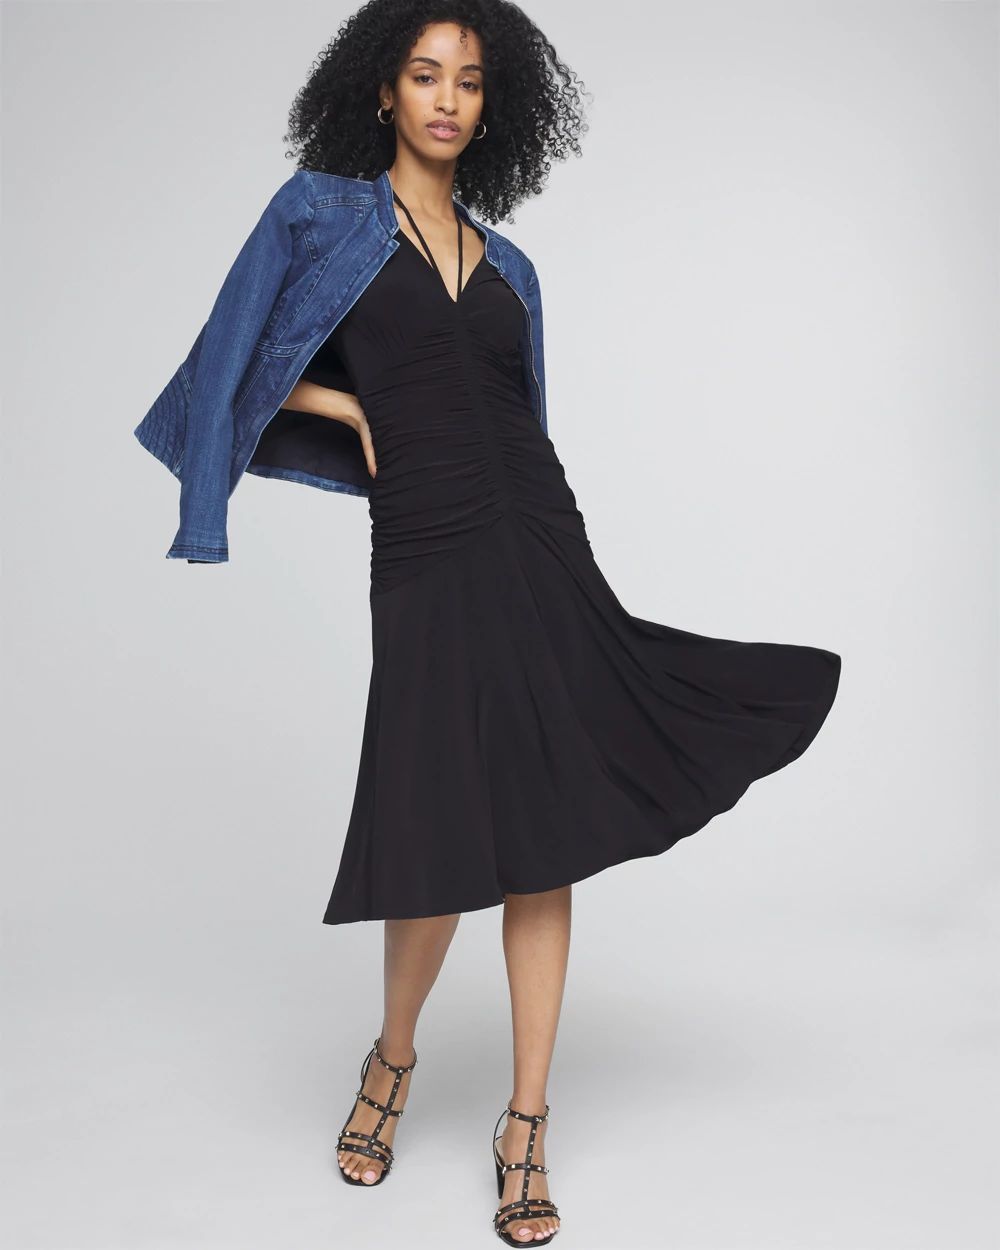 Tie-Shoulder Ruched Matte Jersey Dress click to view larger image.